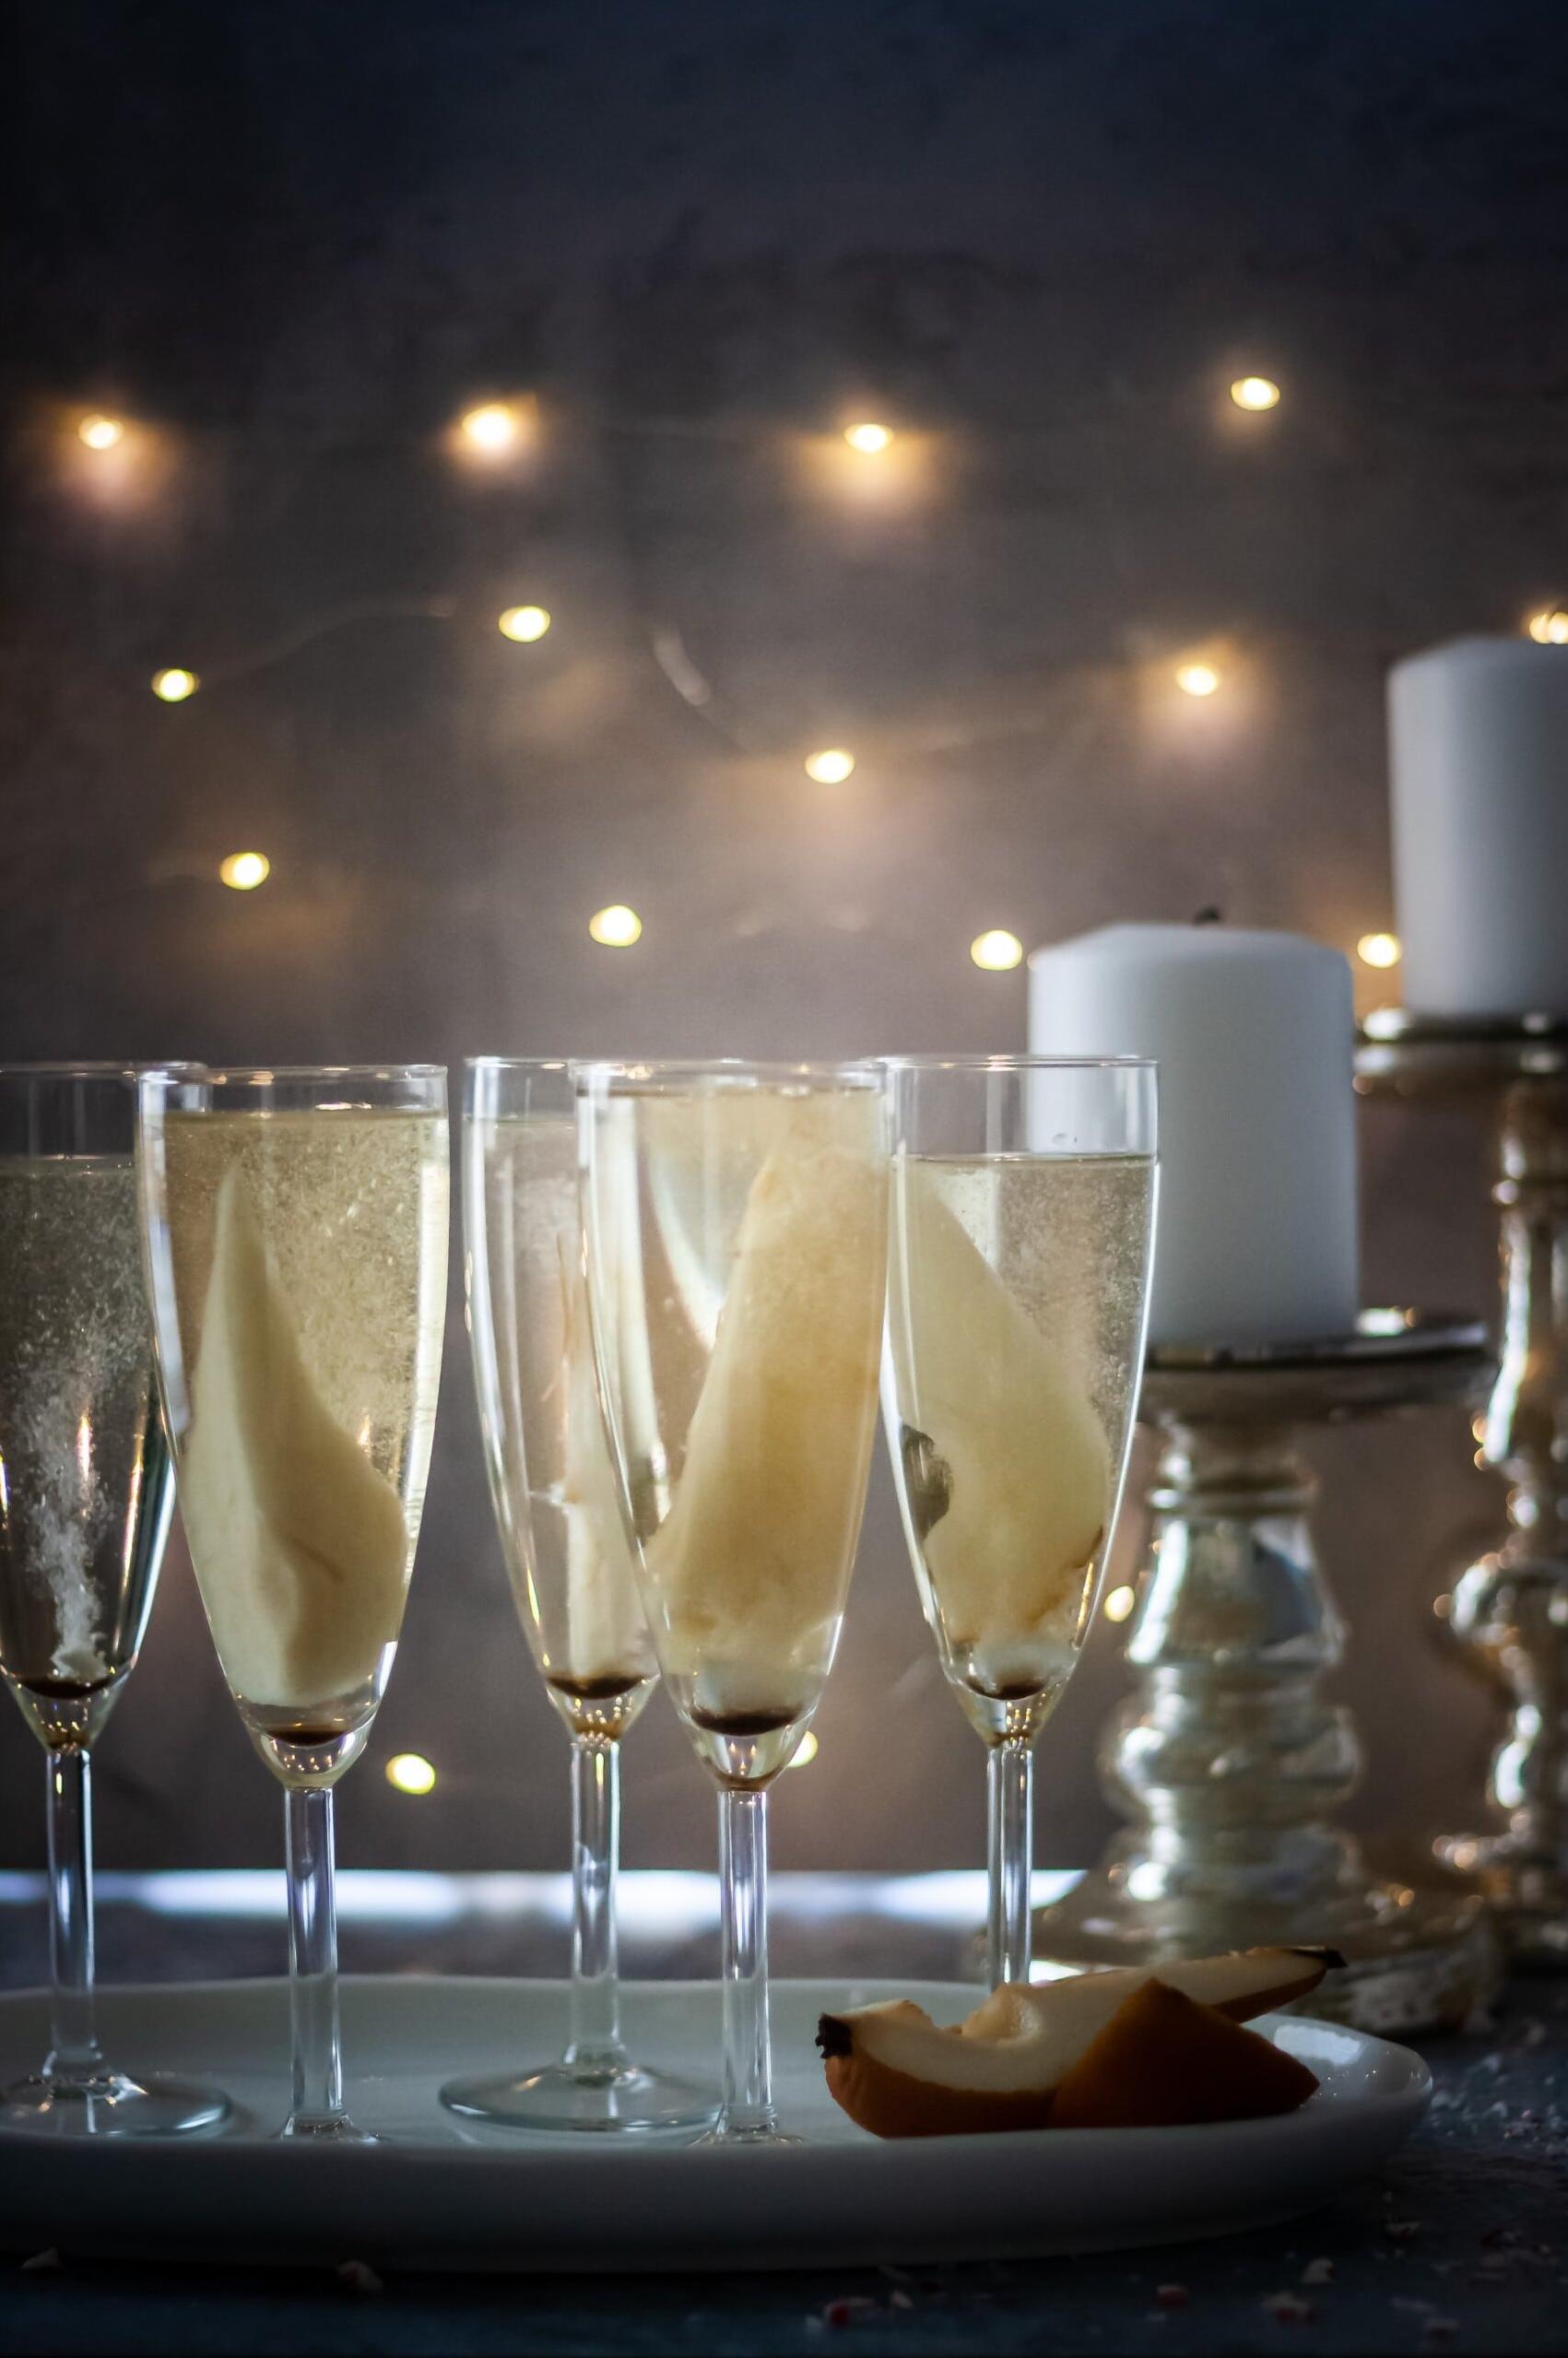  Celebrate in style with a glass of vanilla champagne!